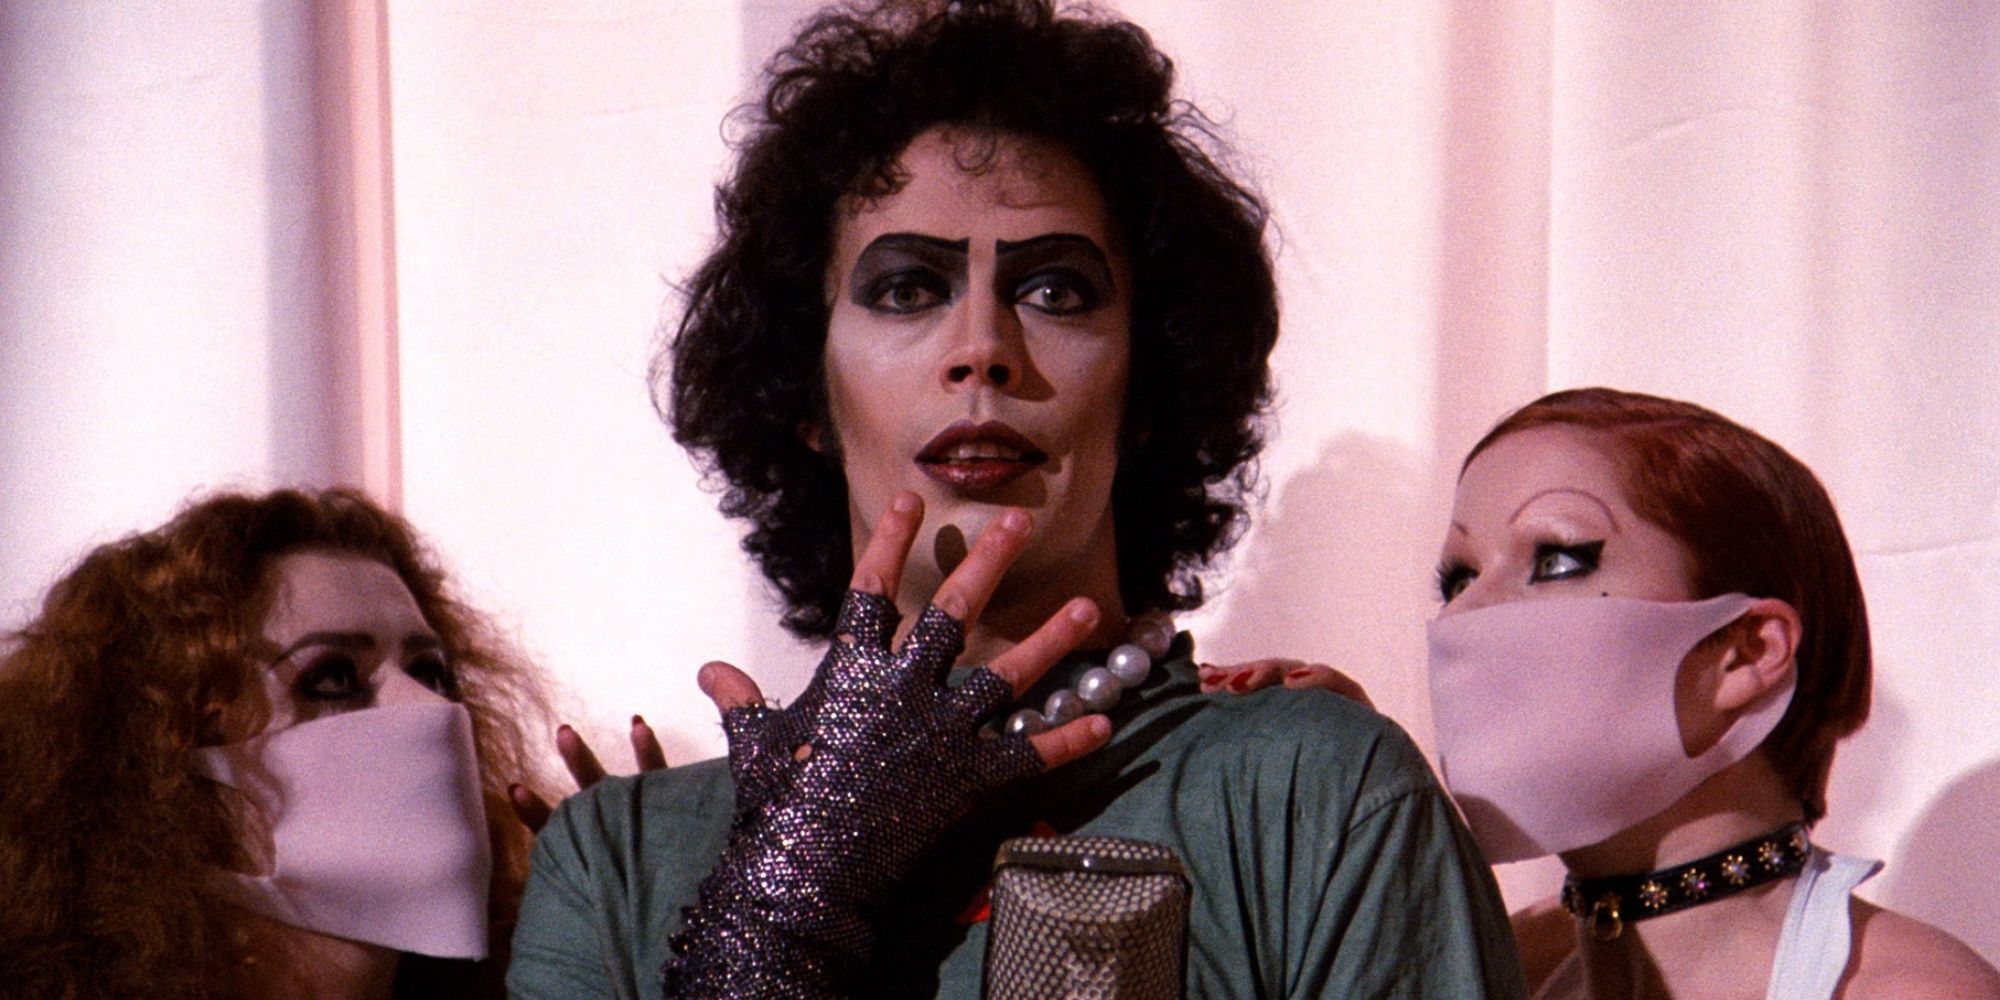 Three drag queens in 'The Rocky Horror Picture Show'